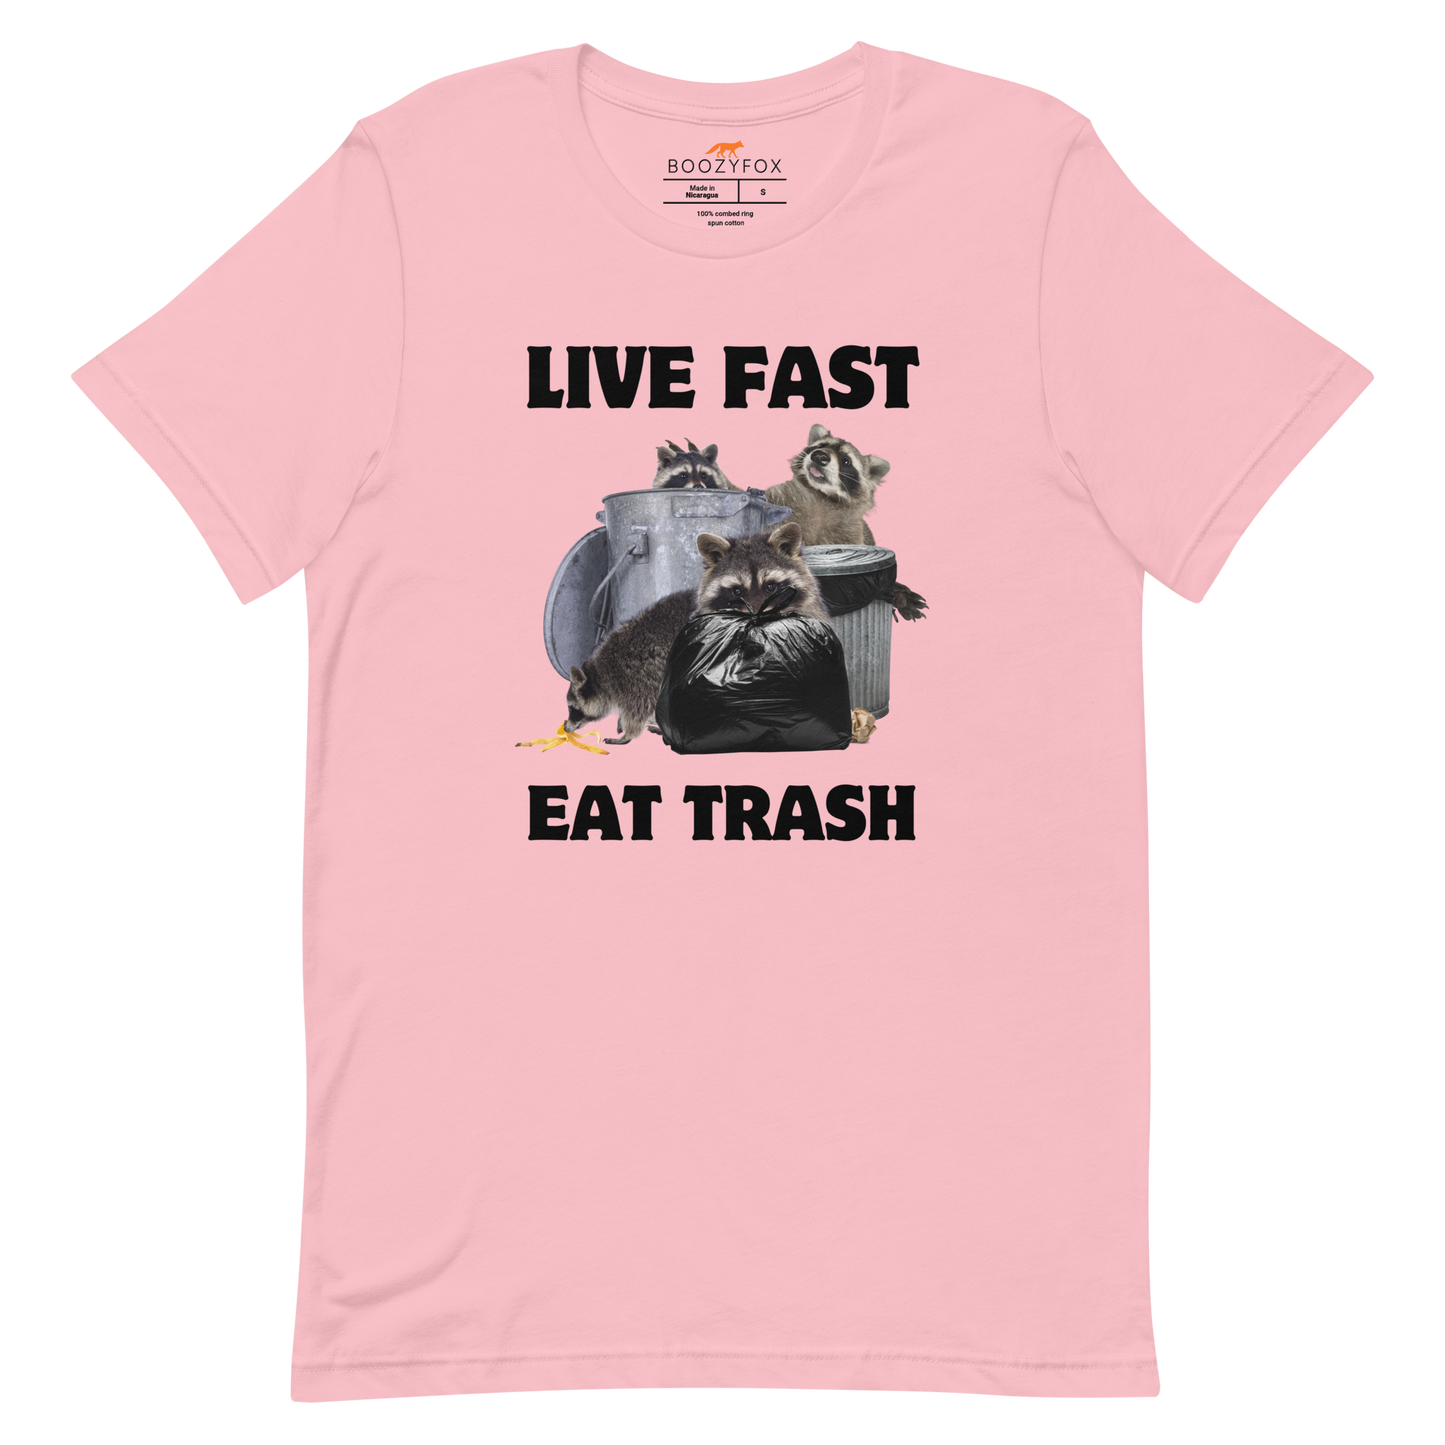 Pink Premium Raccoon Tee featuring a funny 'Live Fast Eat Trash' graphic on the chest - Funny Graphic Raccoon Tees - Boozy Fox